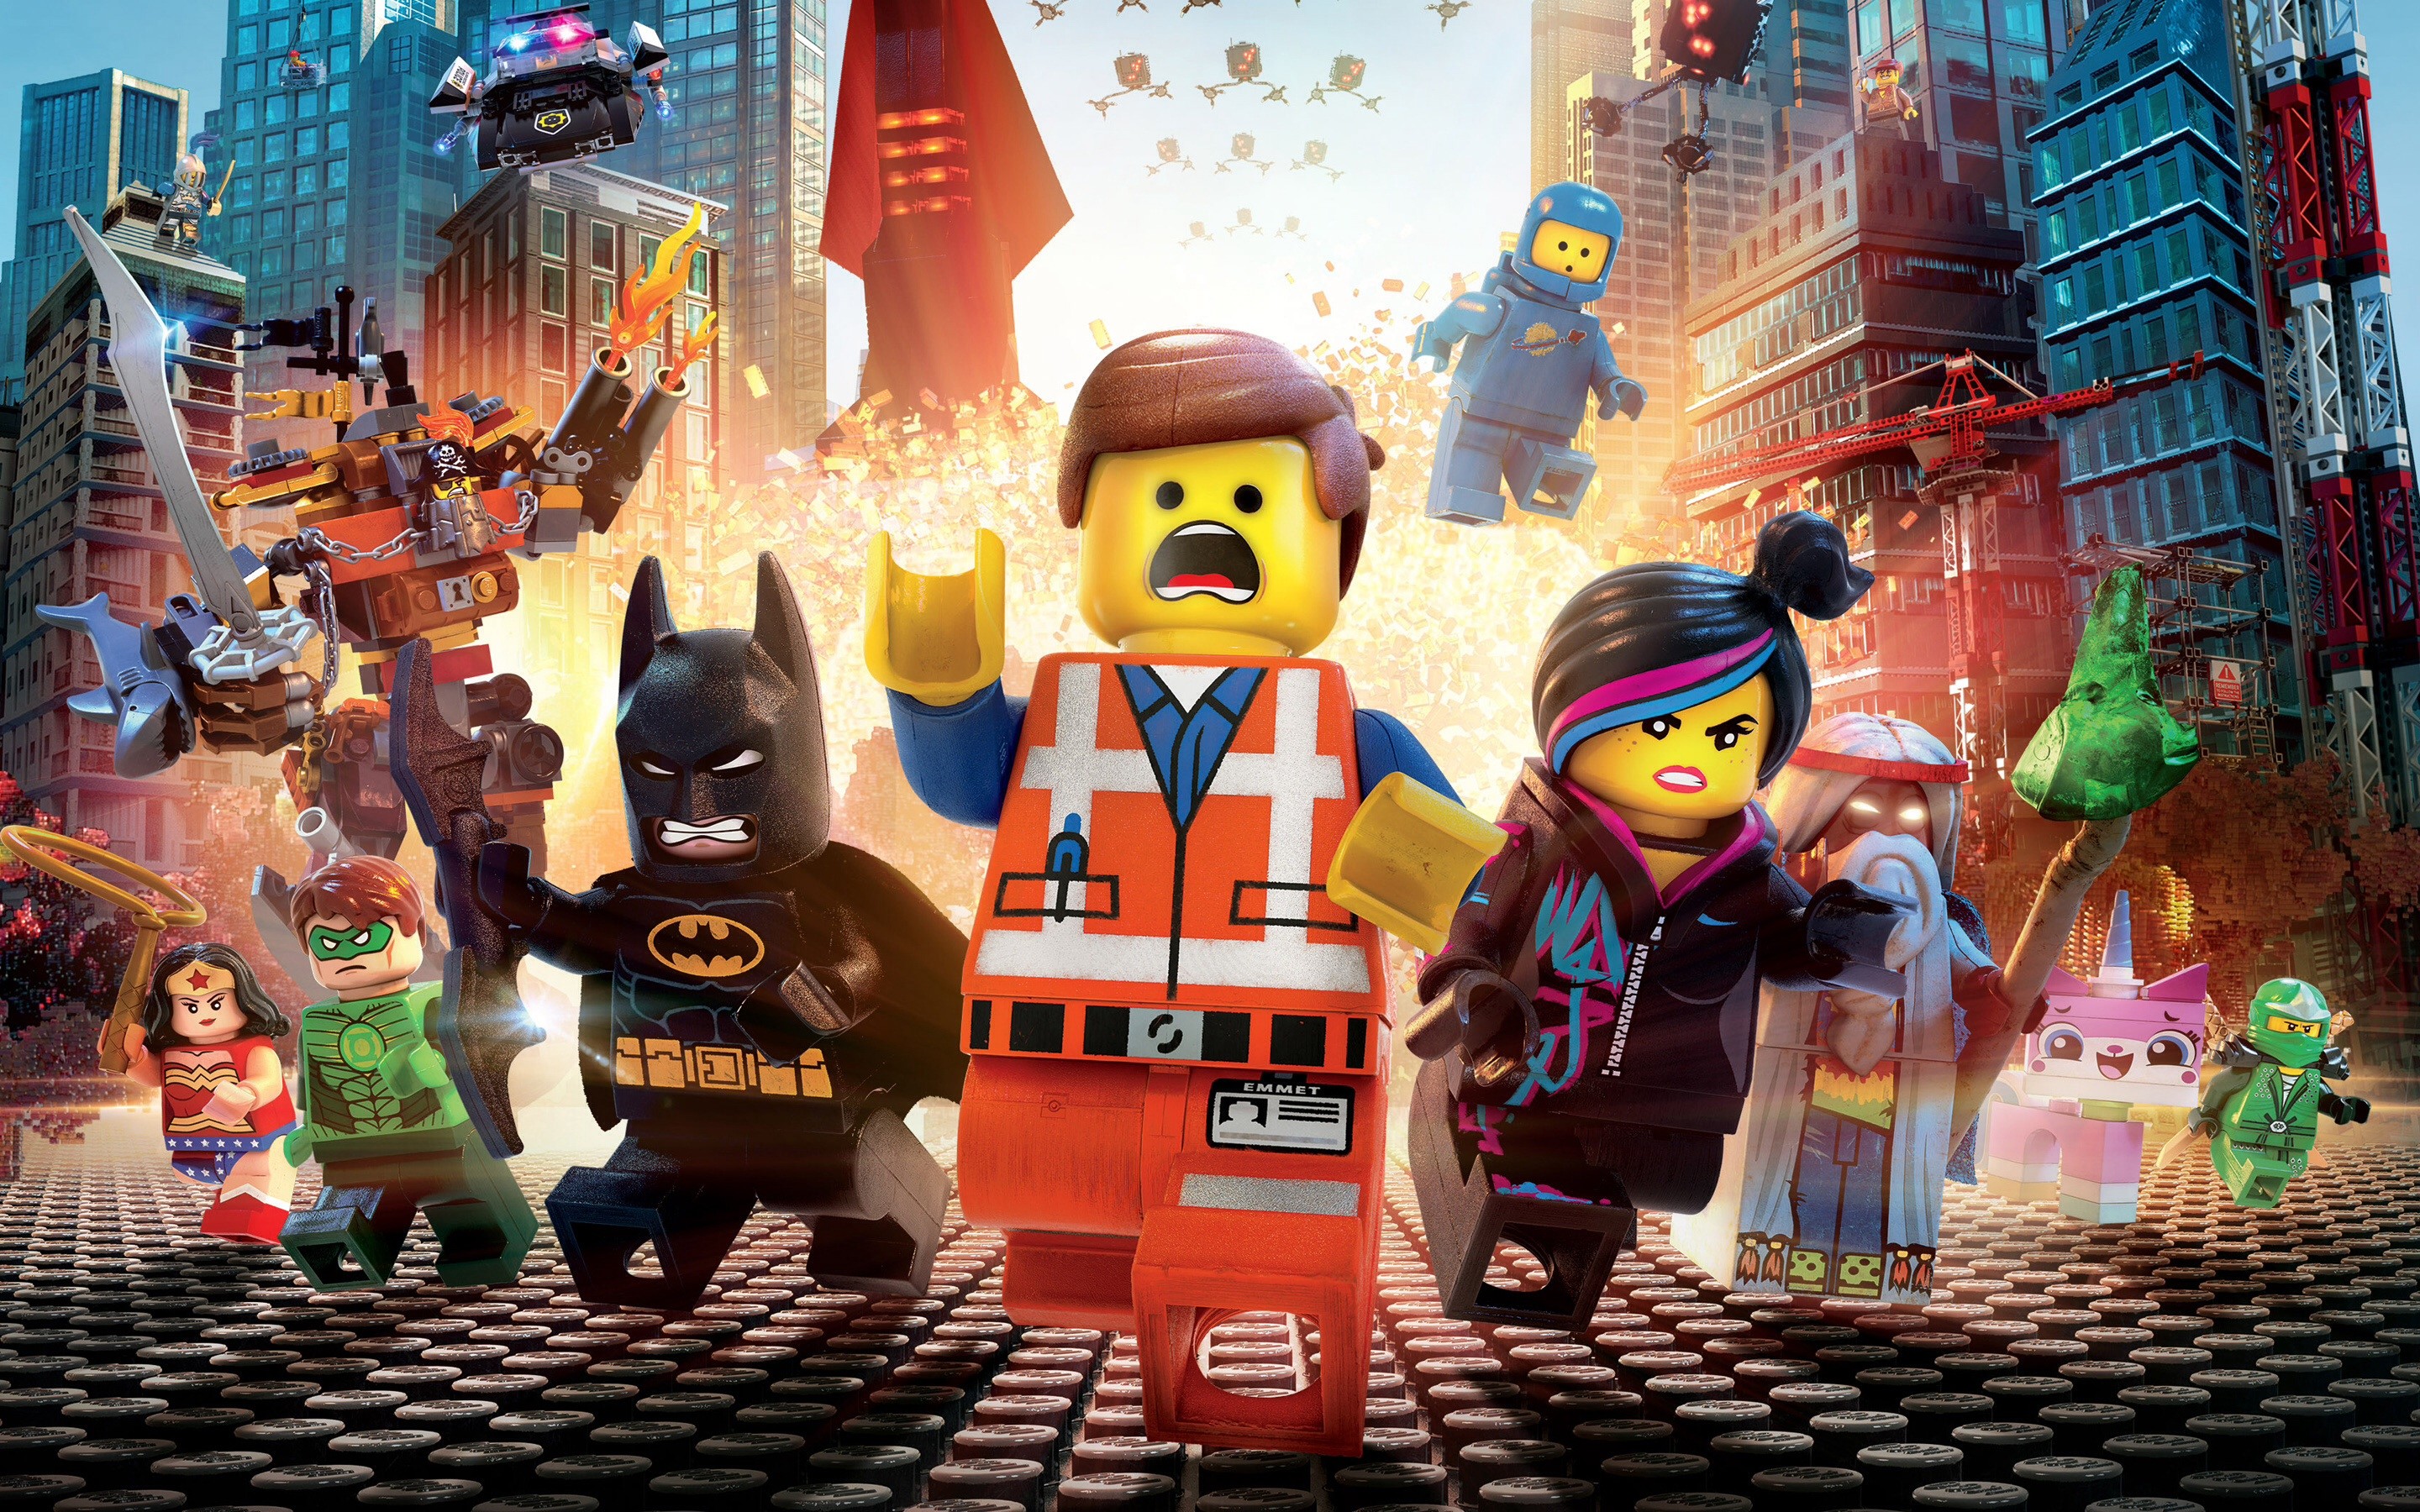 2880x1800 The Lego Movie images Lego Movie HD wallpaper and background photos